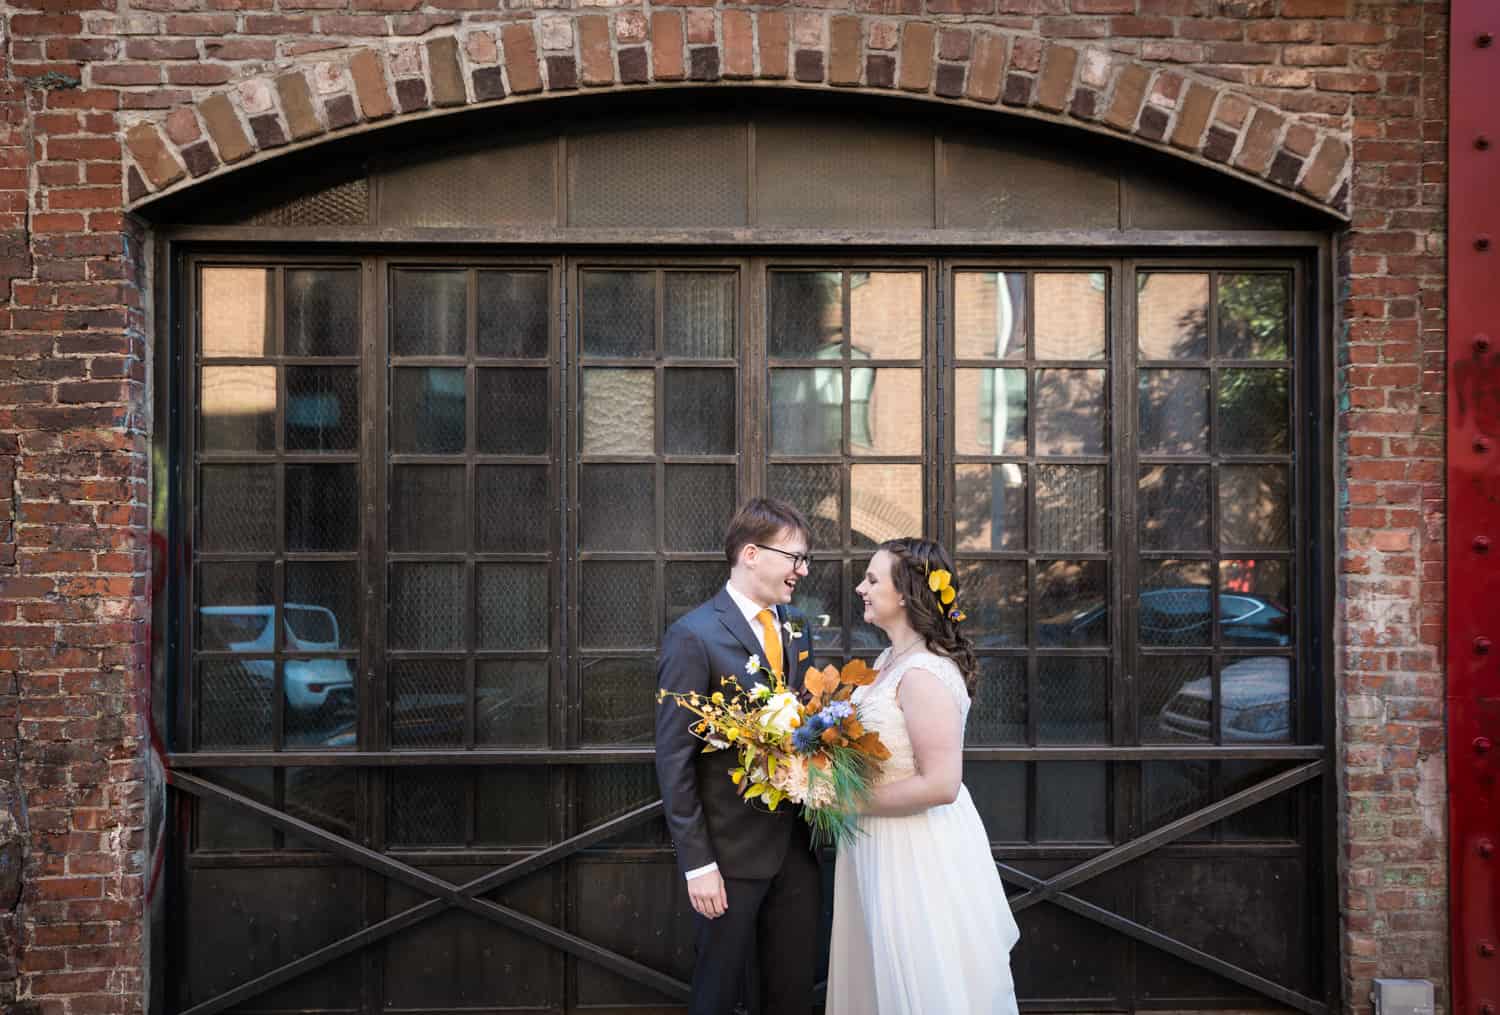 Bride and groom in front of arched window for an article on Covid-19 wedding planning